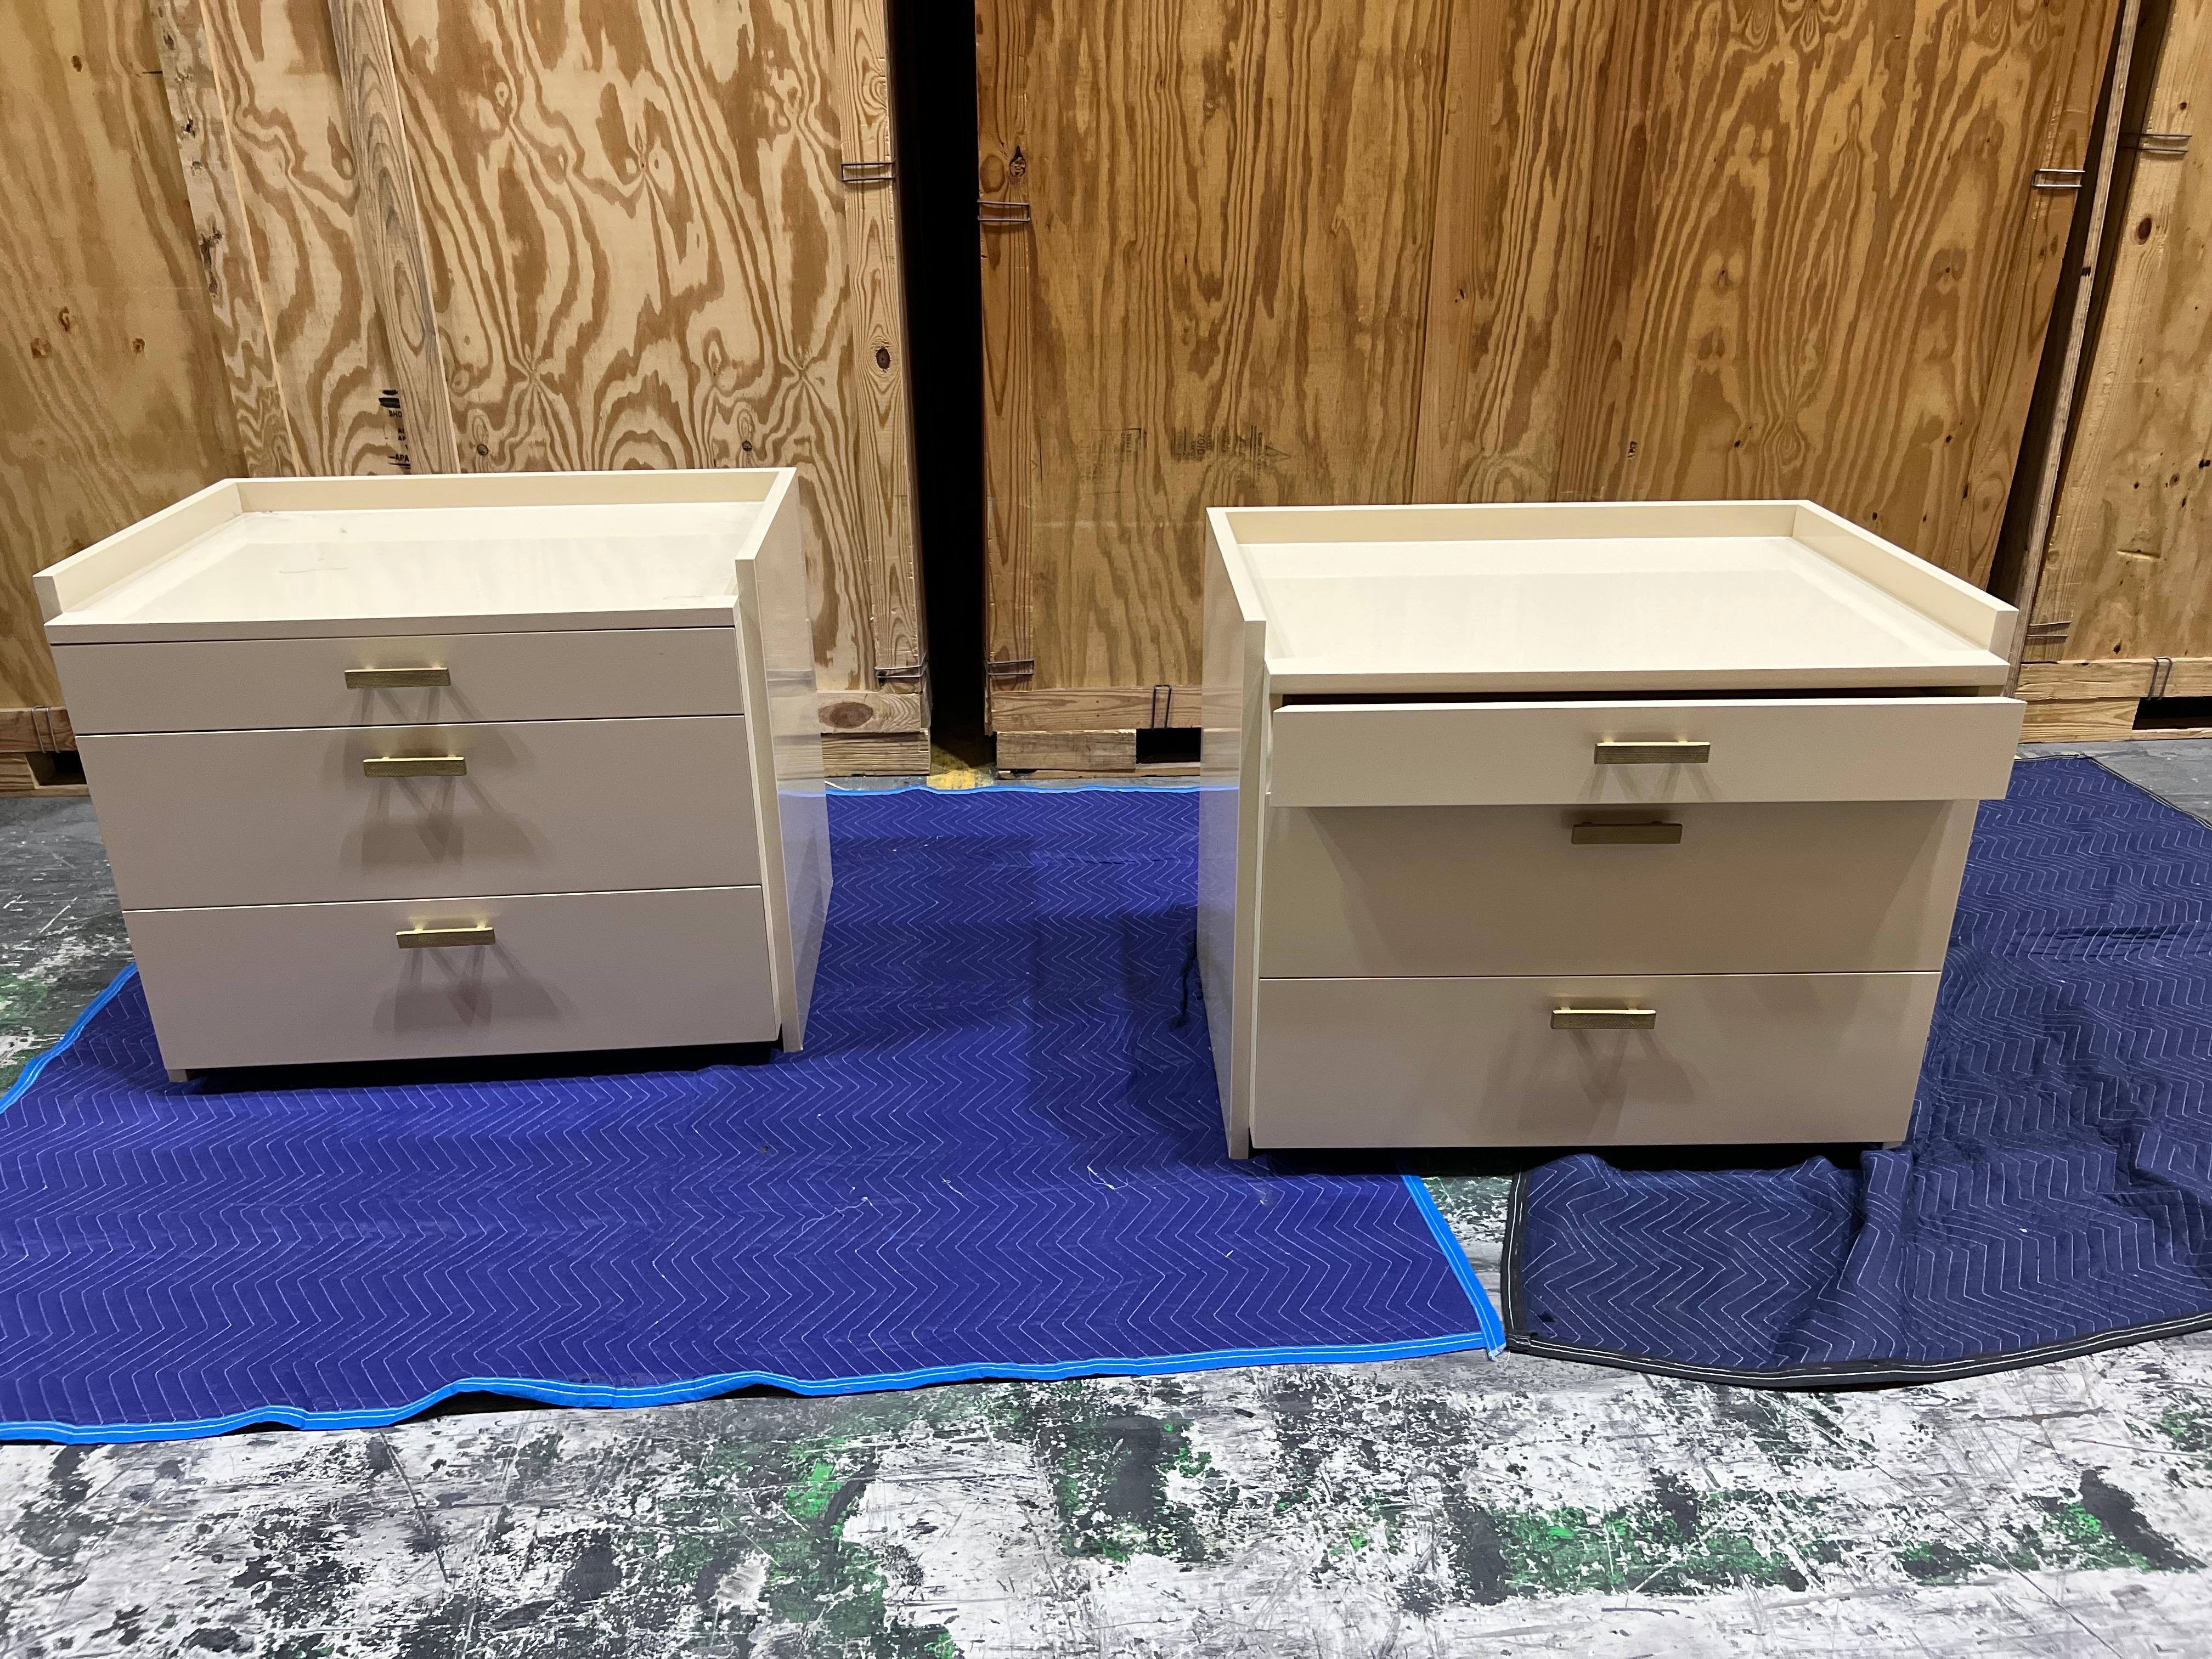 Pair of custom fabricated cream lacquered bedside tables.
Classic clean lined custom Bedside tables with three drawers and brass pulls.
Some wear to finish, slight flaking.
Measures: 36